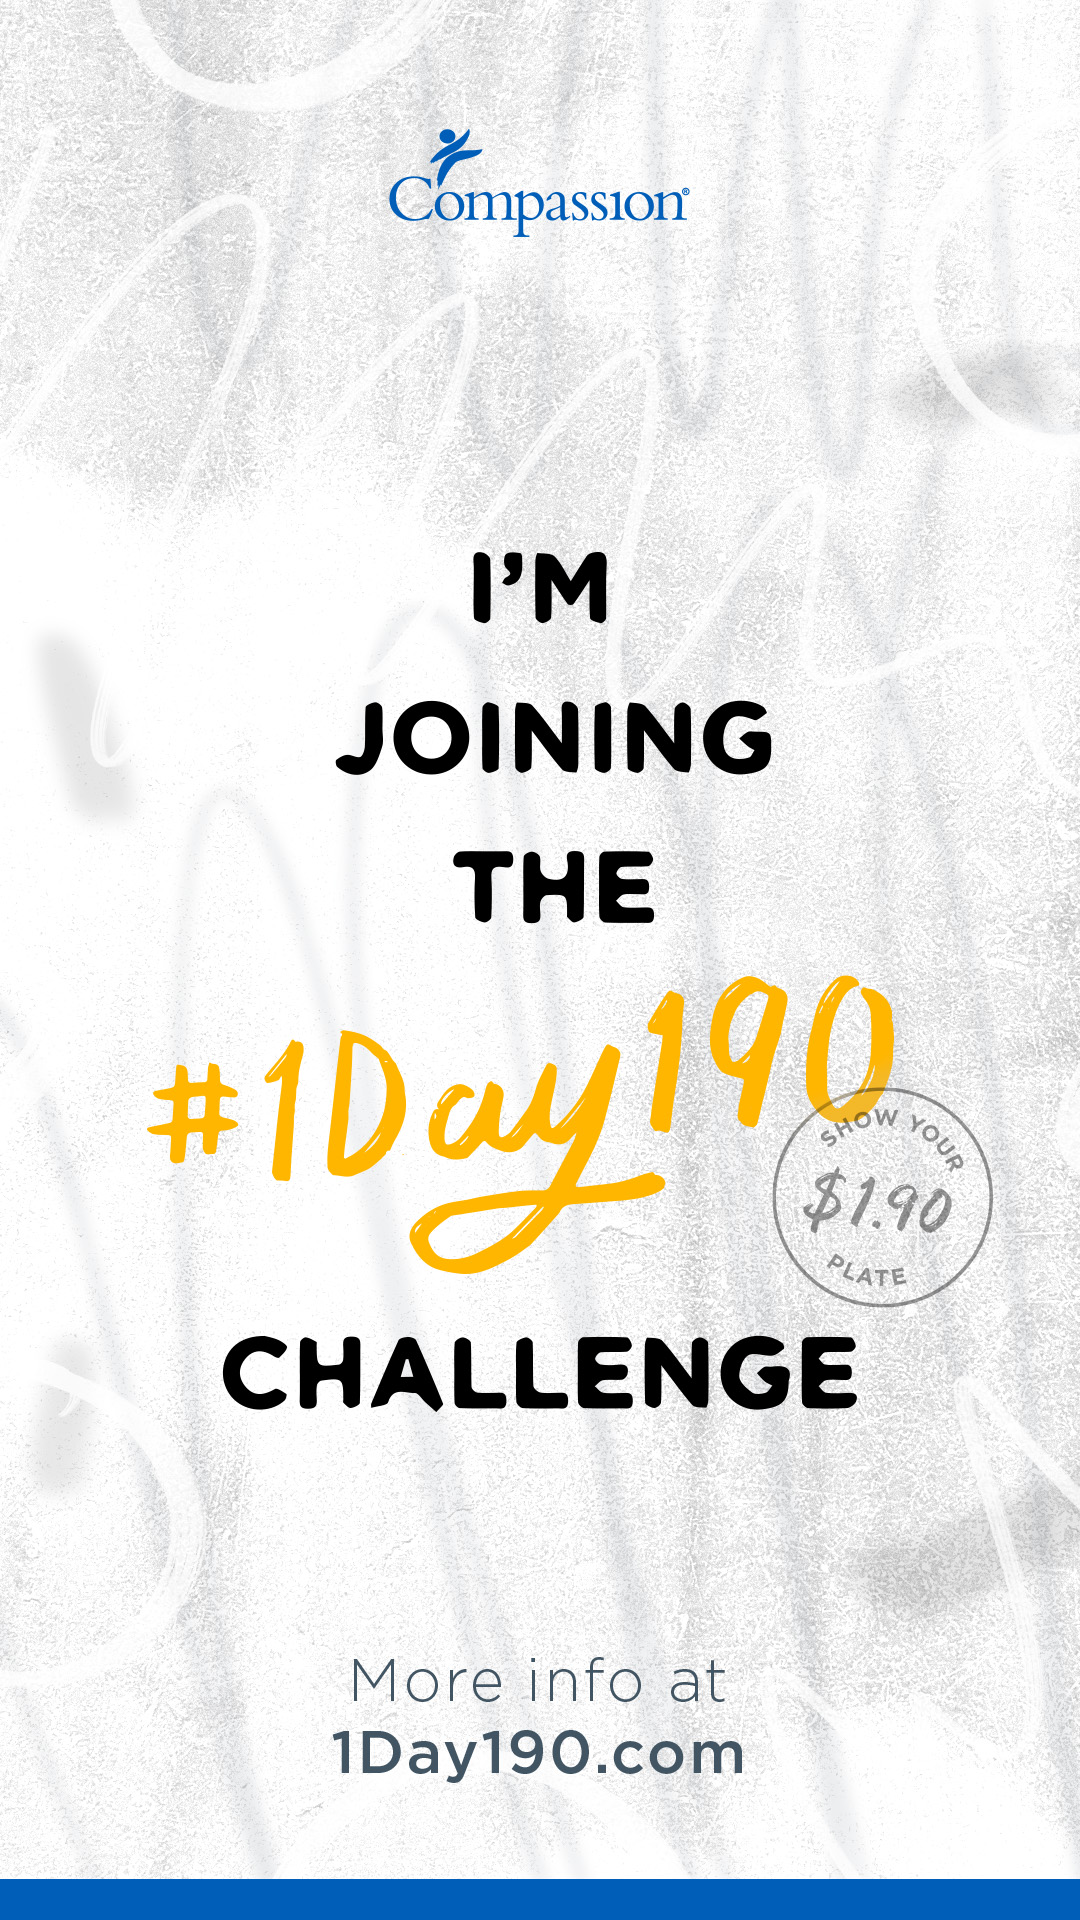 I am joining 1day190